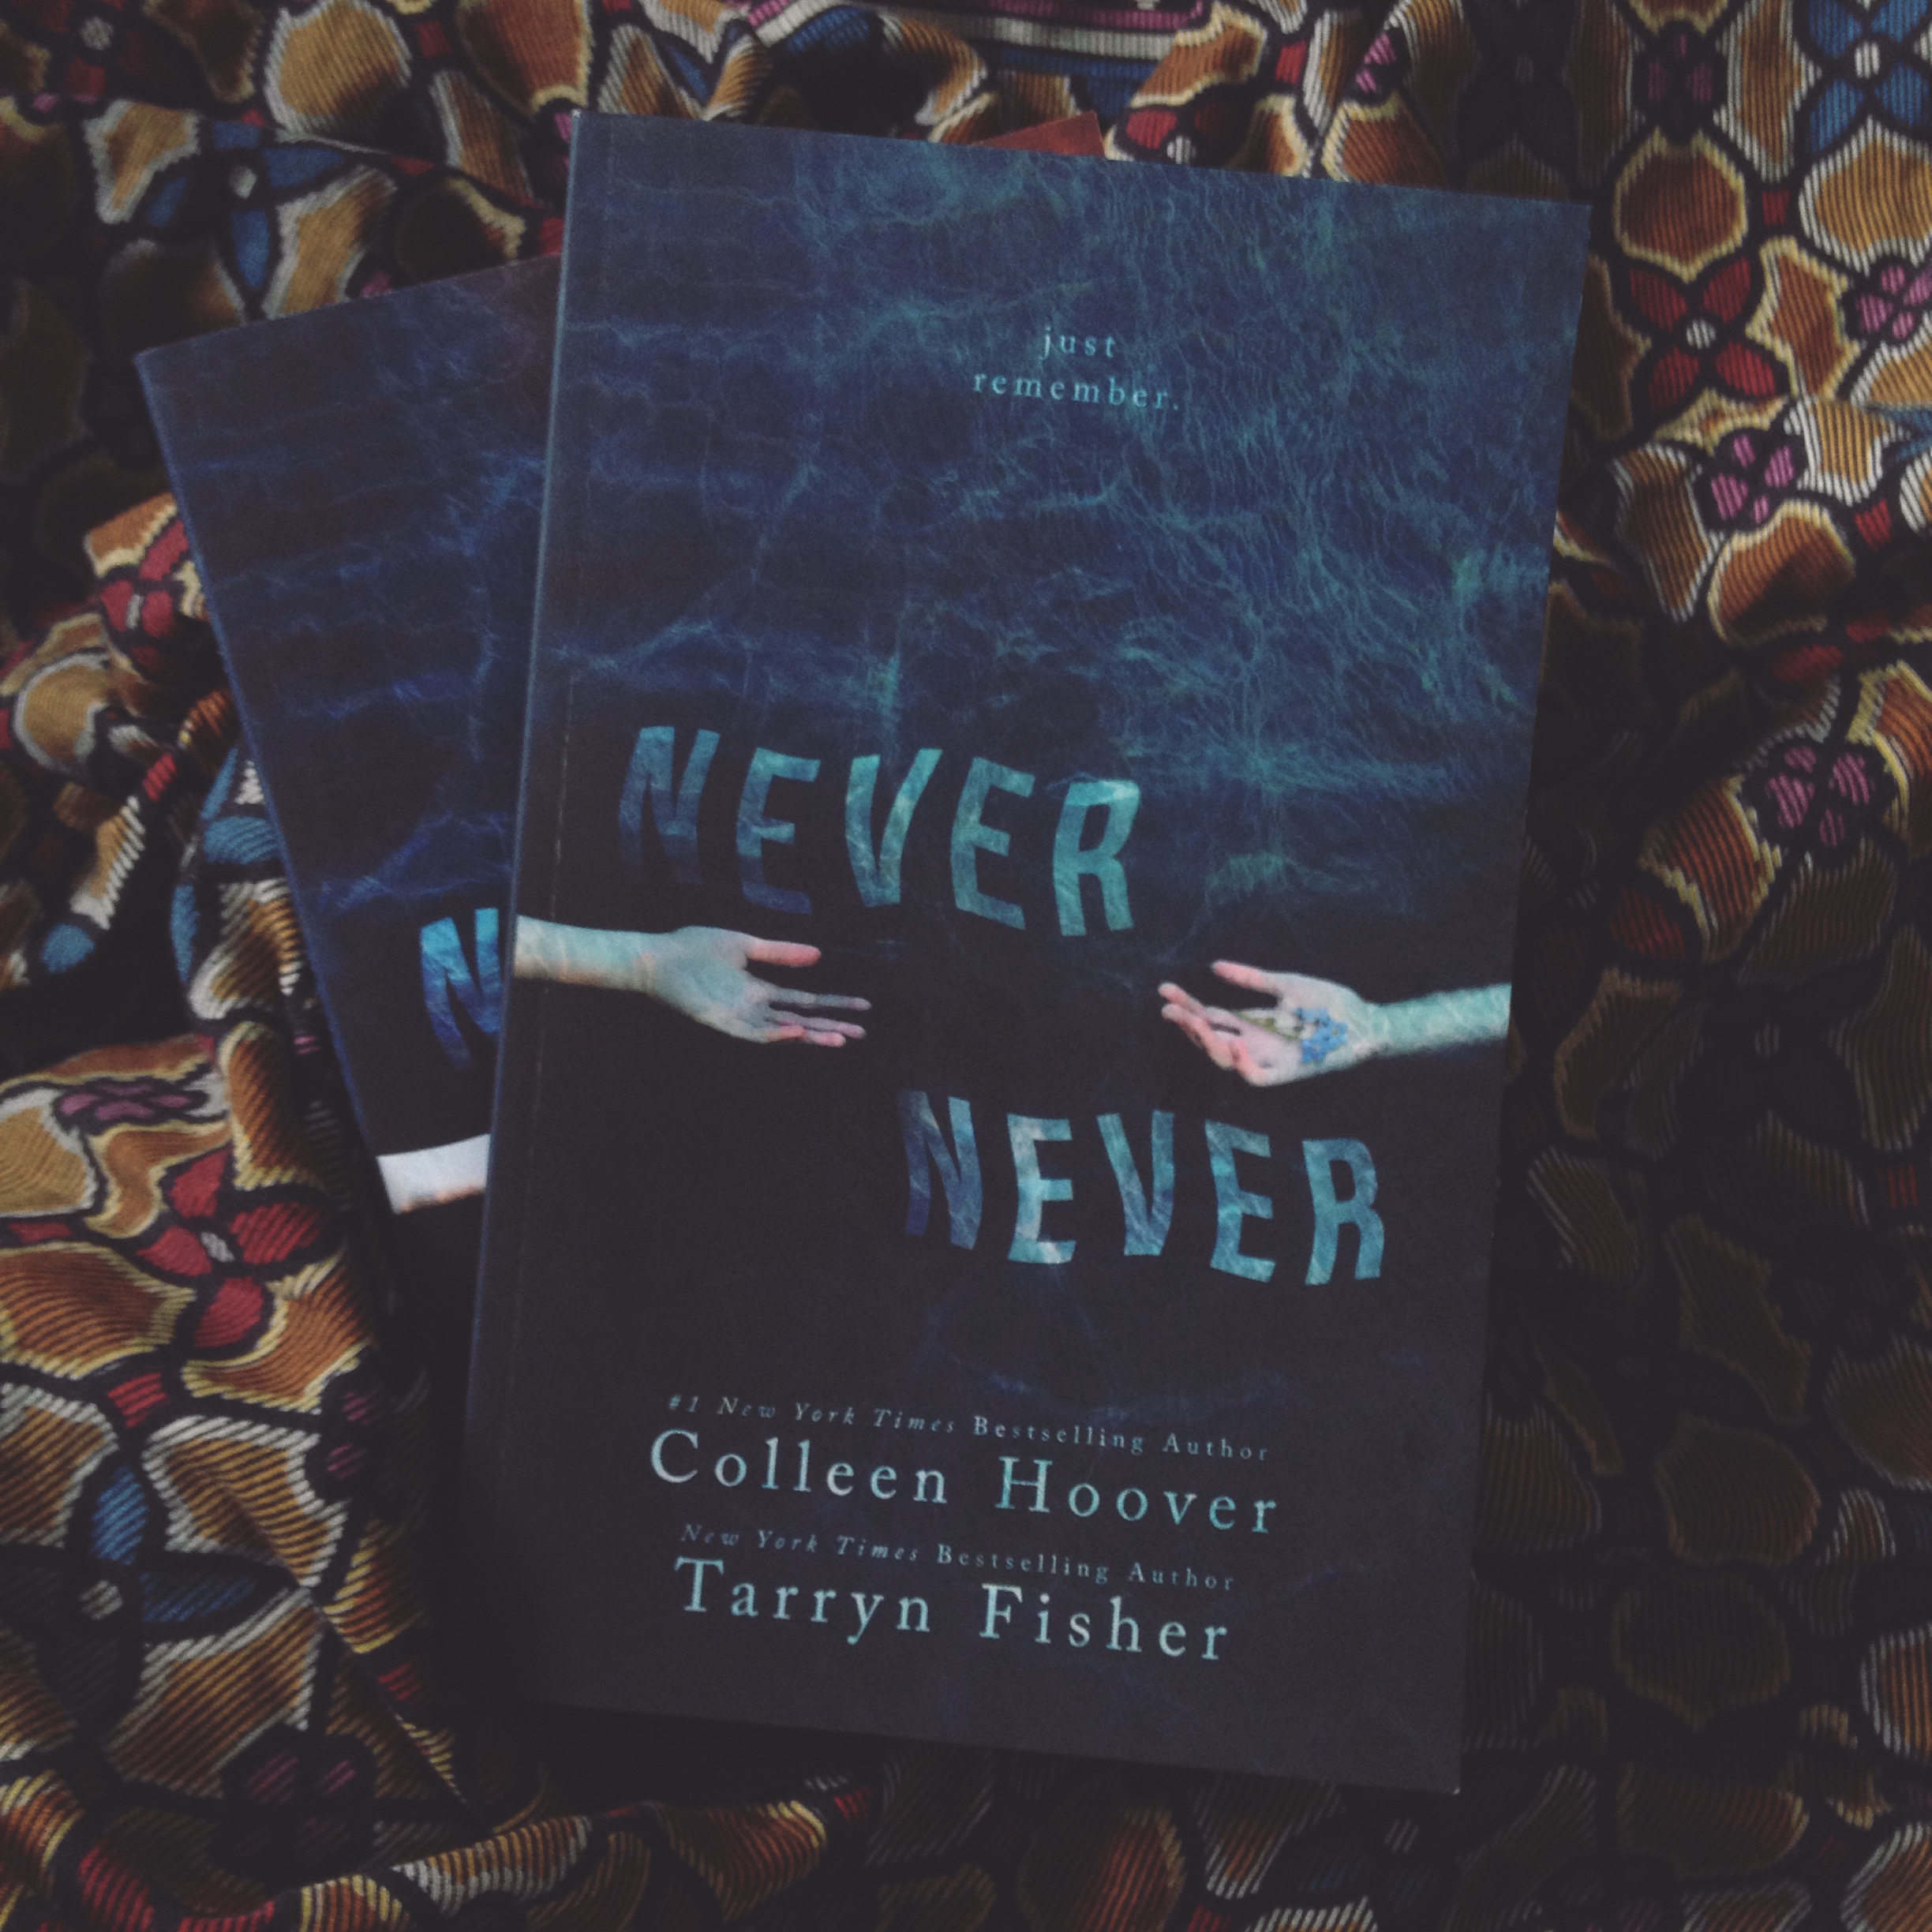 Book Review #47] Never Never Part 2 by Colleen Hoover and Tarryn Fisher –  Just Read, JM!